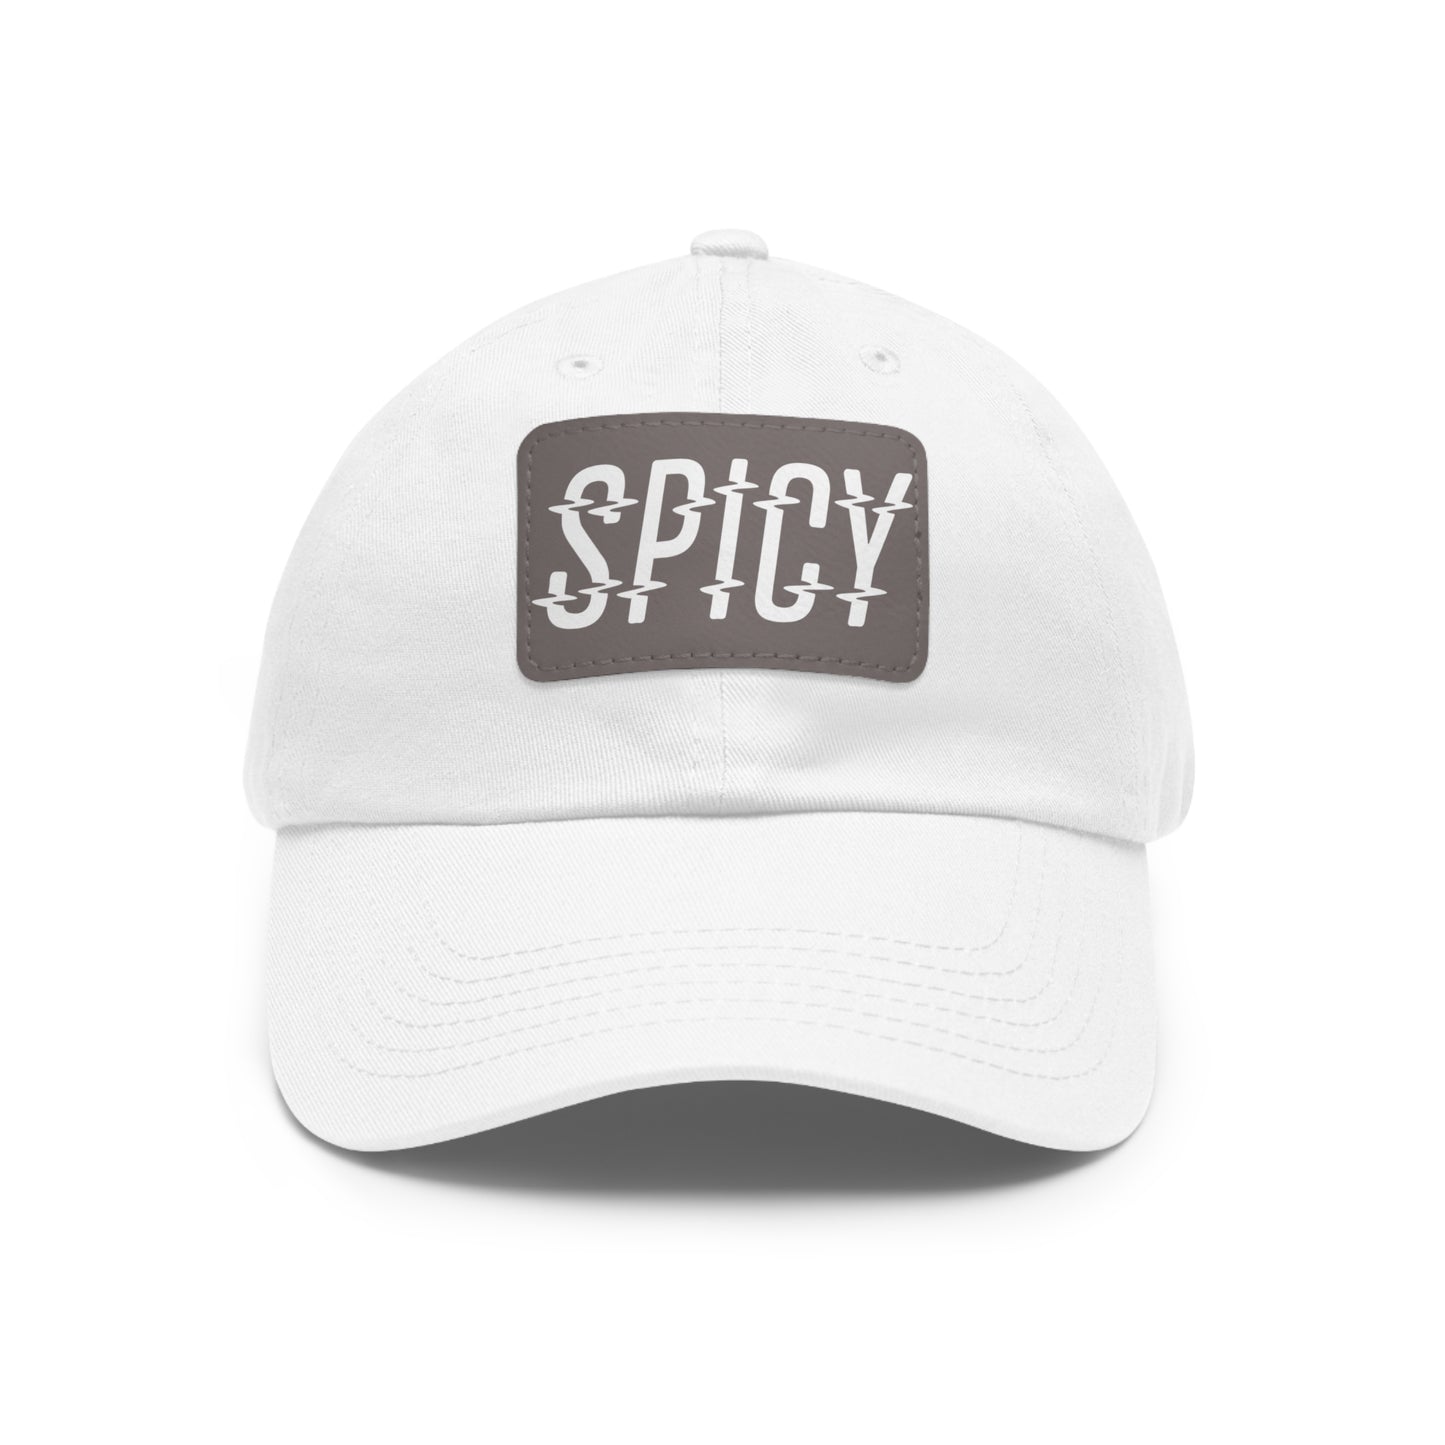 Spicy Glitch Logo | Dad Hat with Faux Leather Patch